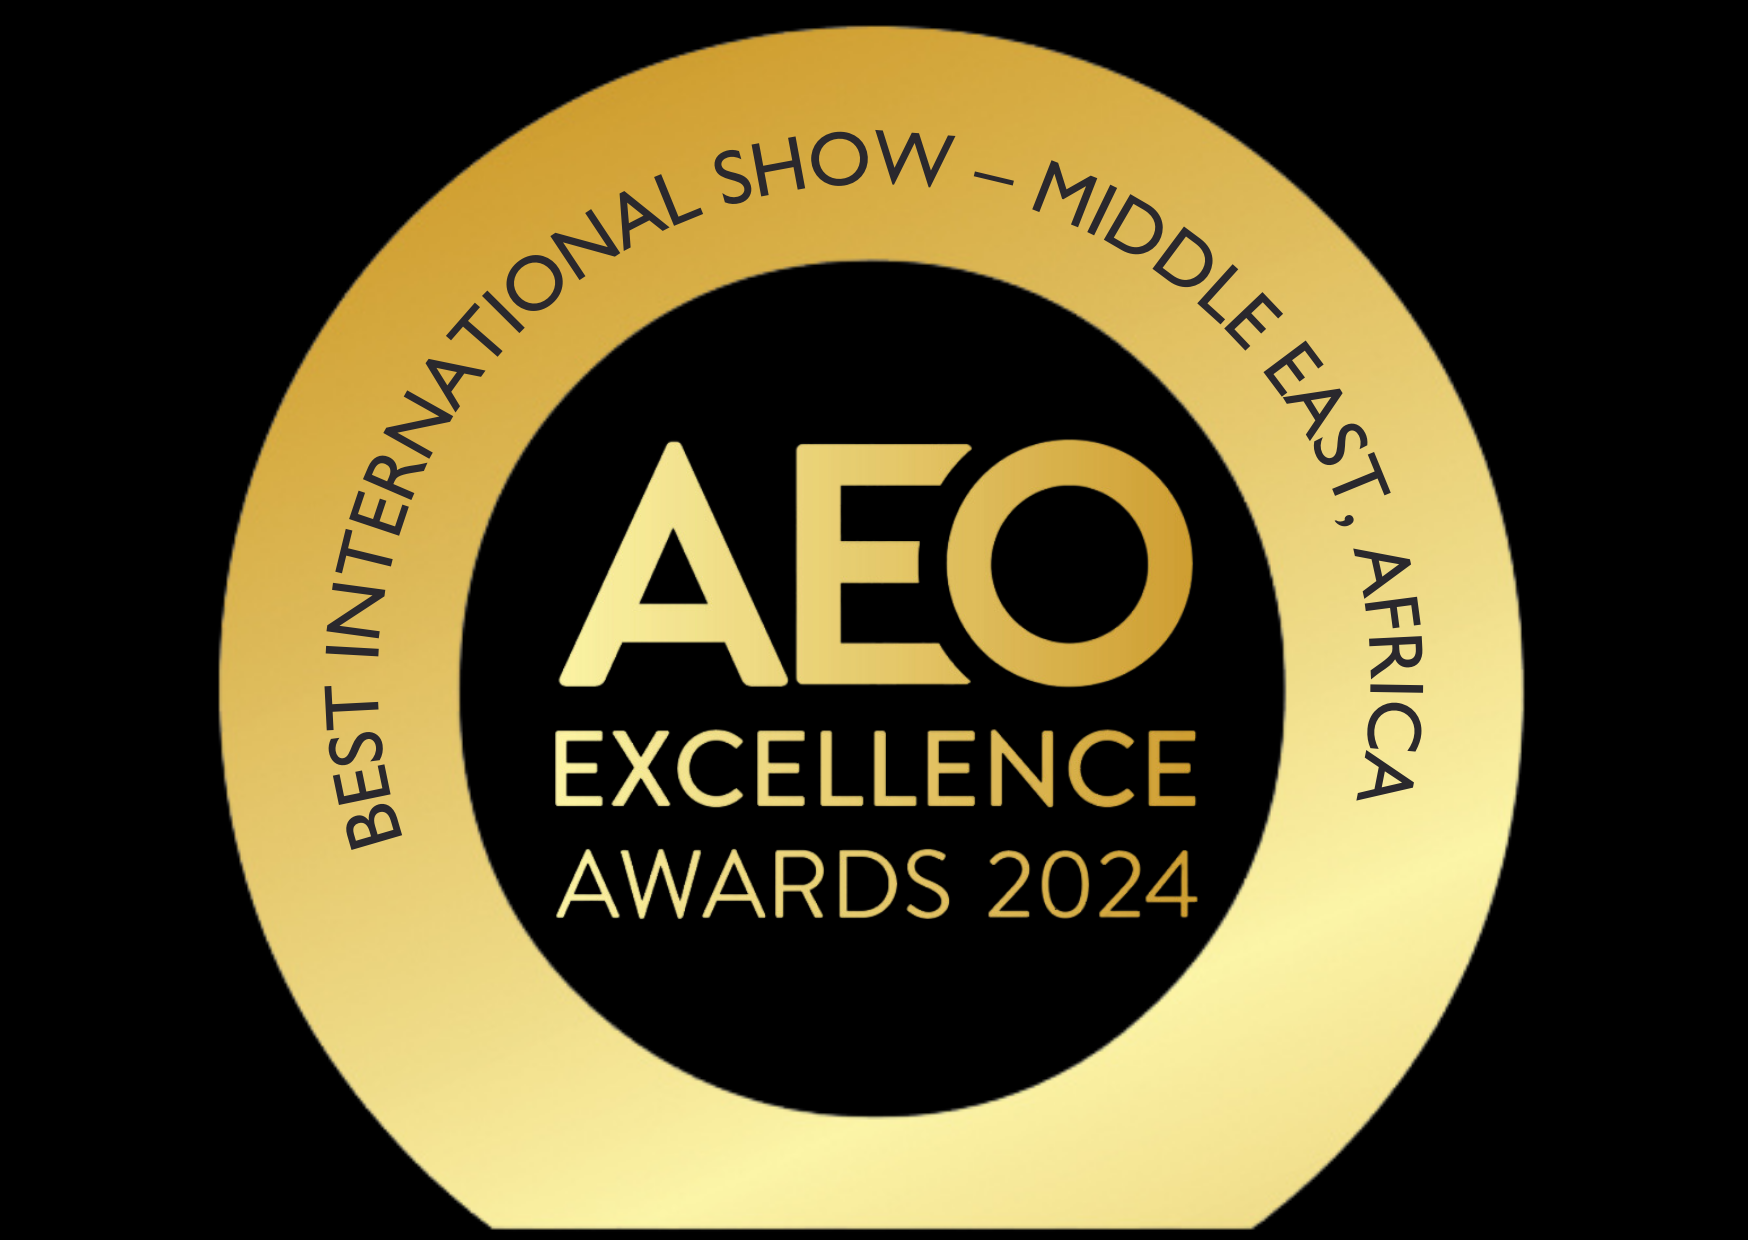 BEST INTERNATIONAL SHOW- MIDDLE EAST, AFRICA